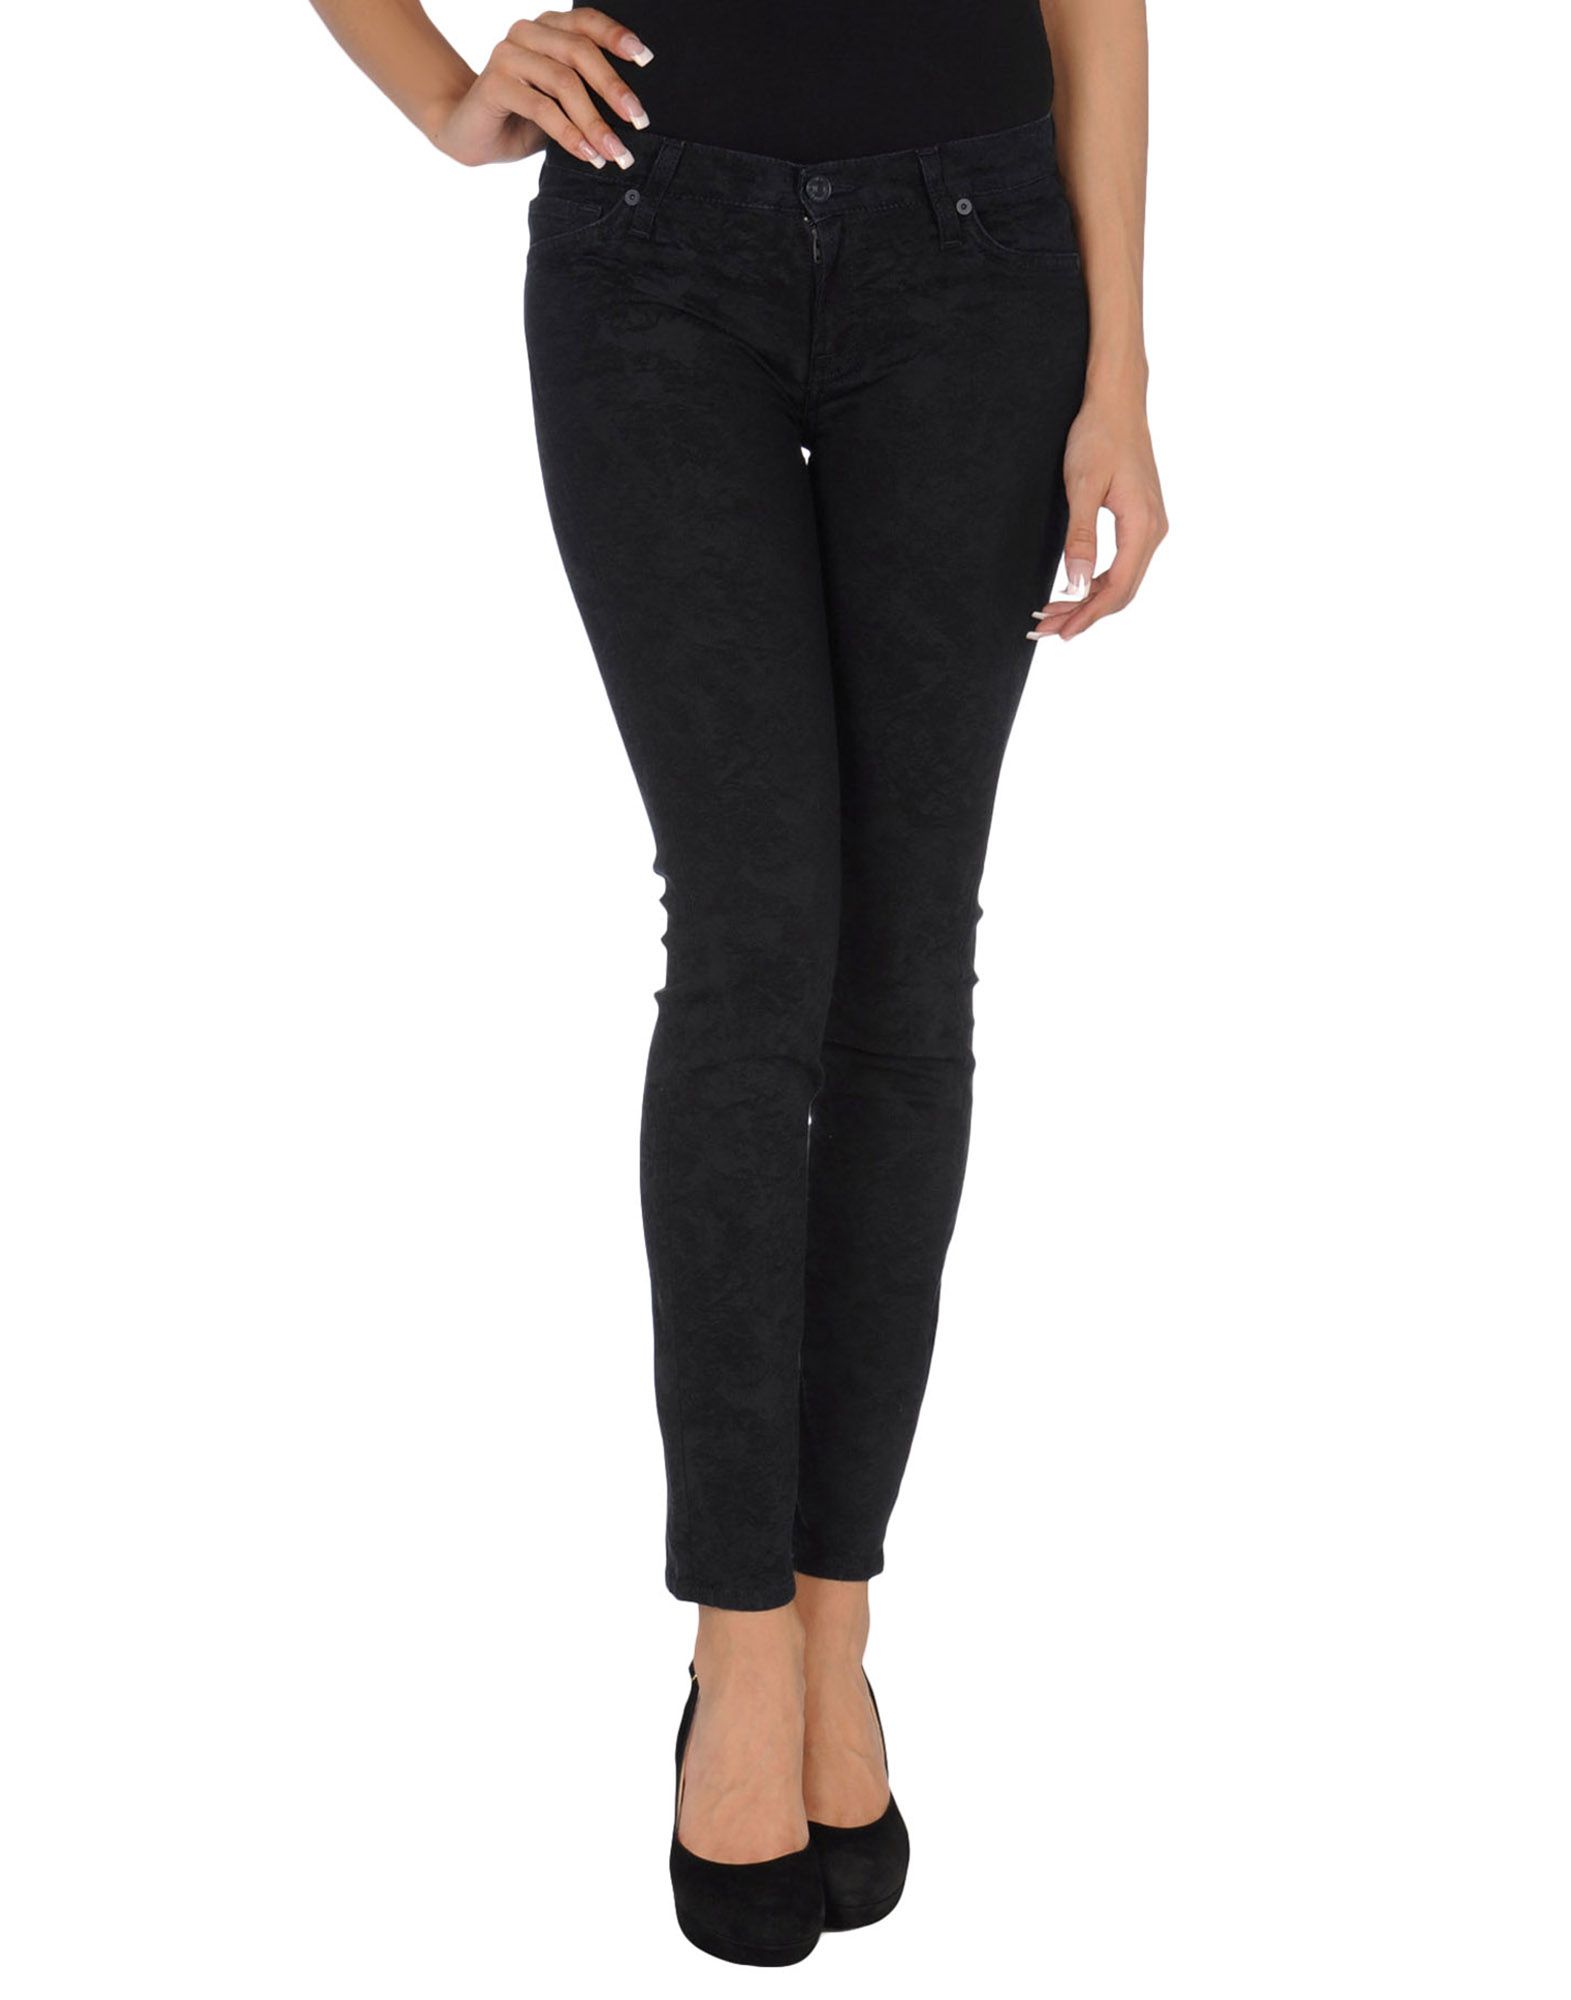 Foto 7 For All Mankind Pantalones Mujer Azul oscuro